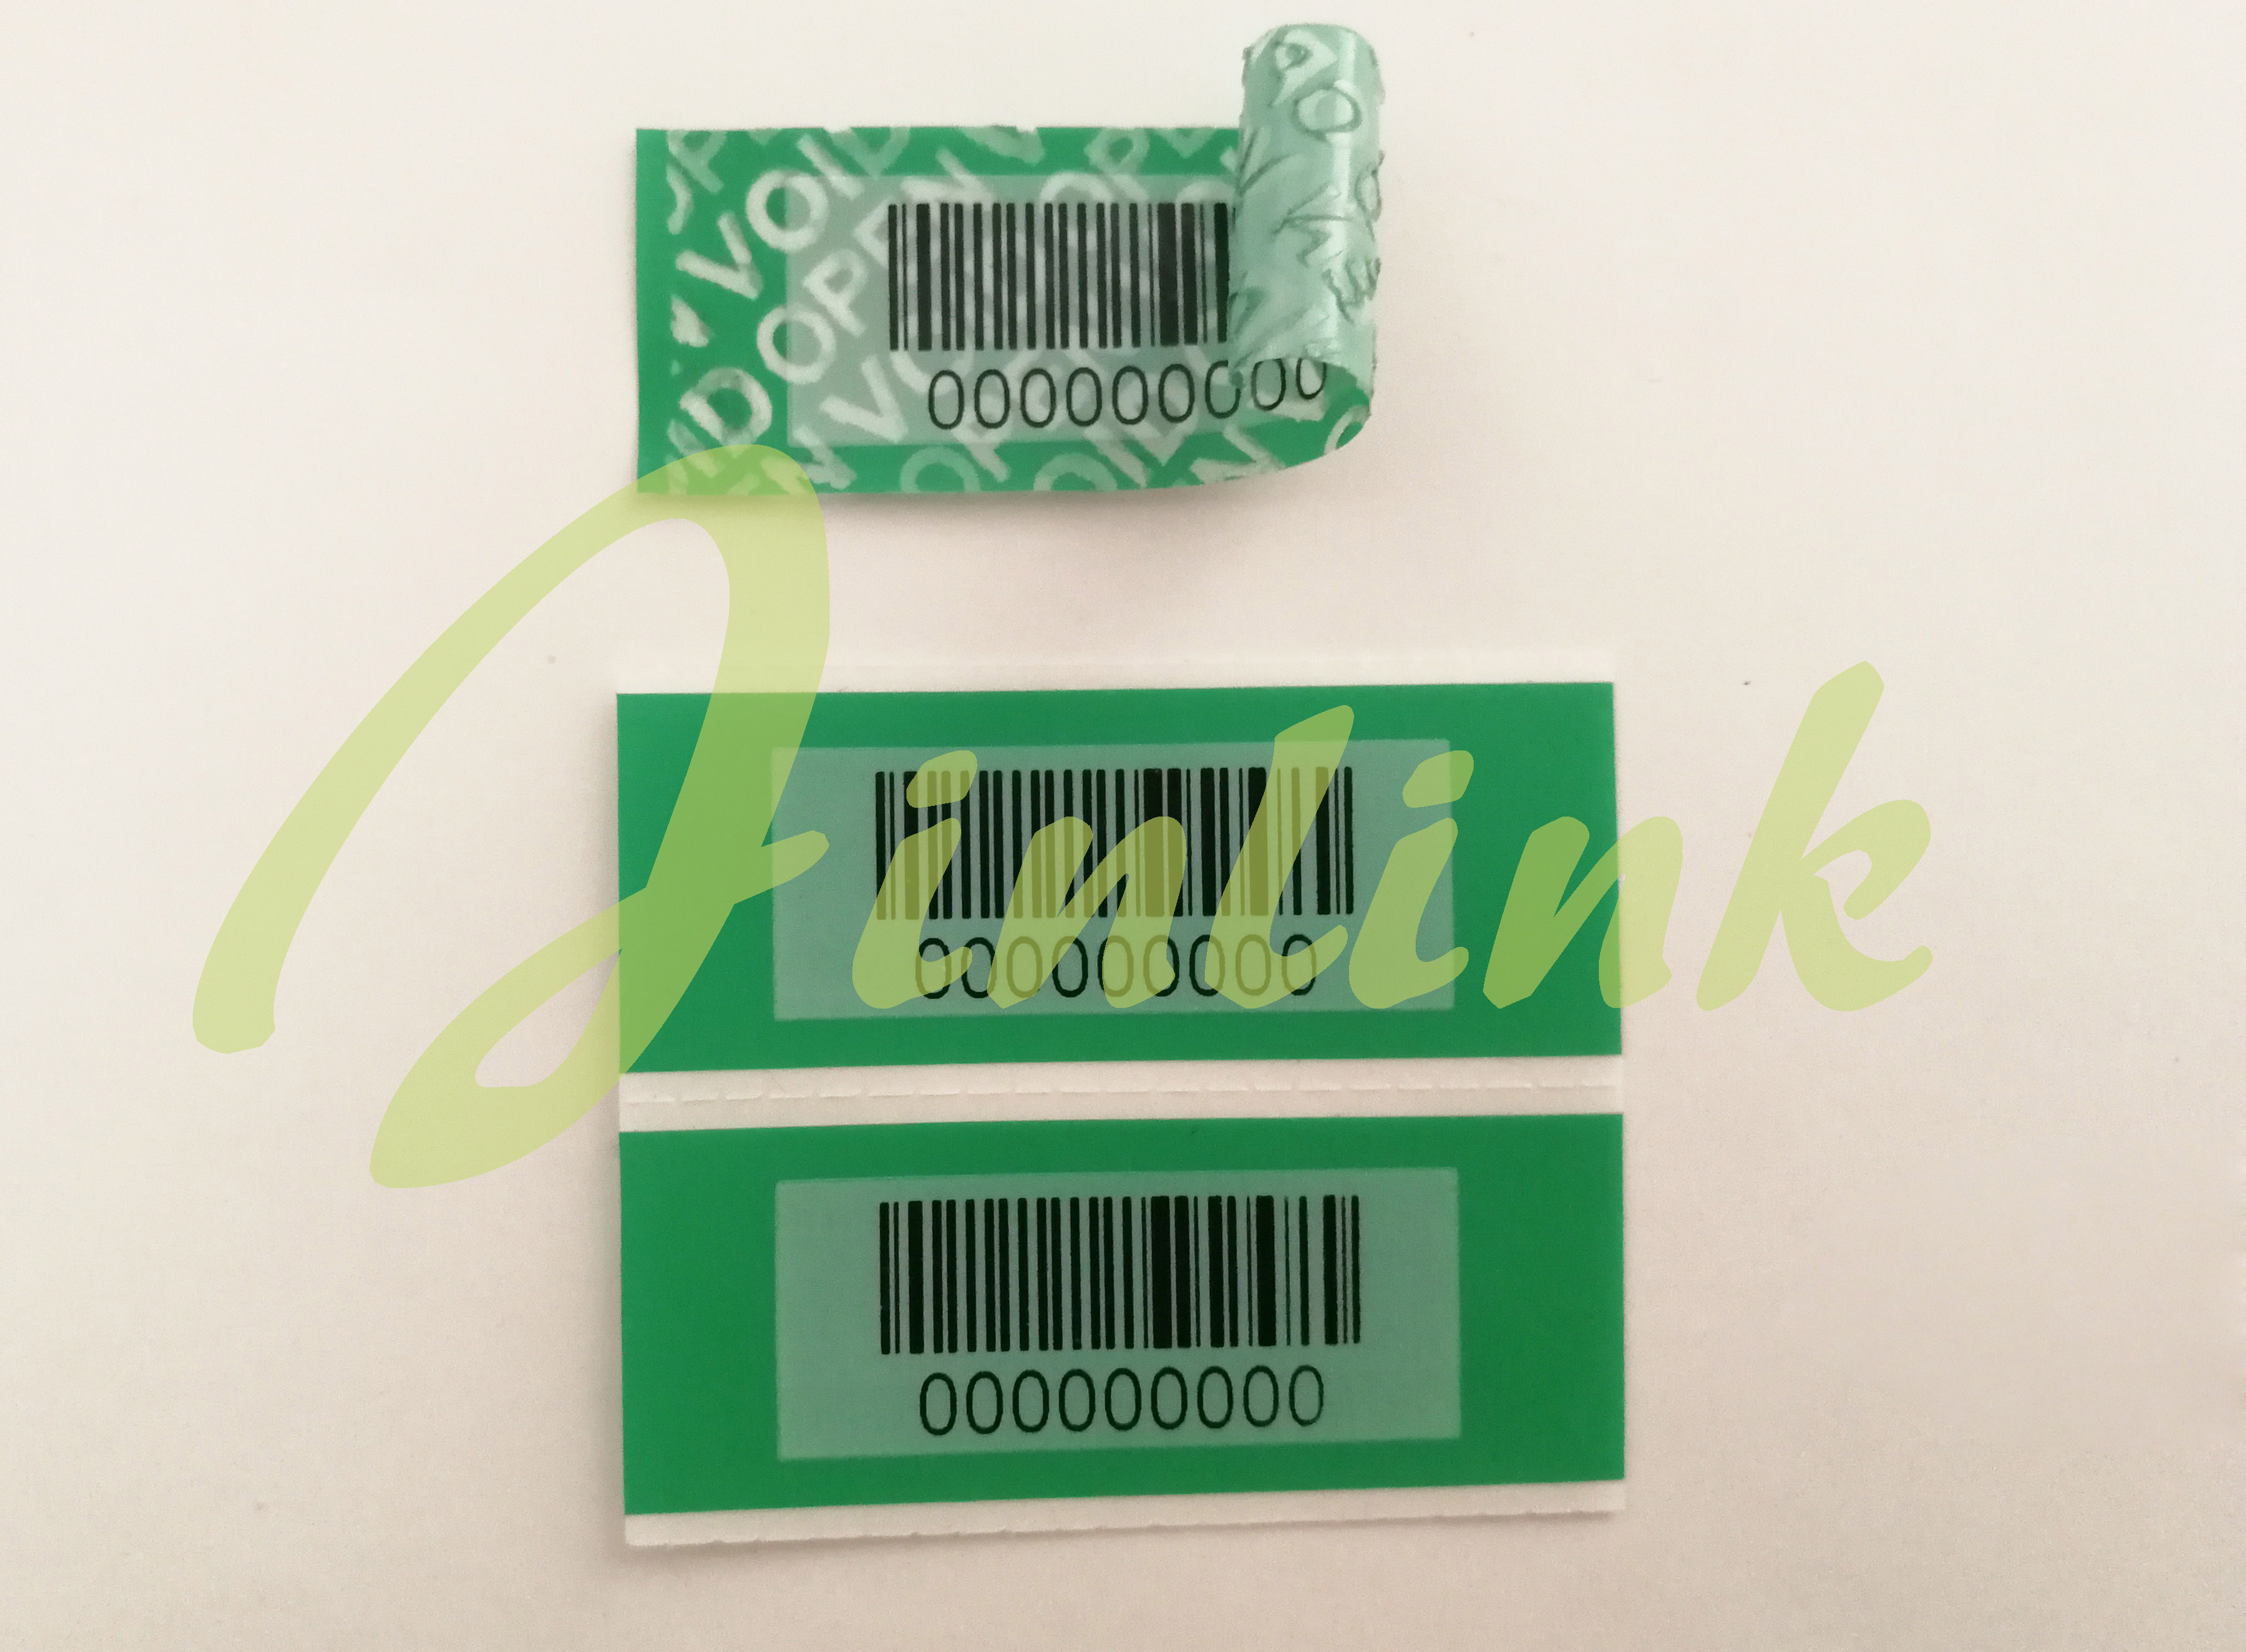 Non residue warranty void anti fake security label with bar code